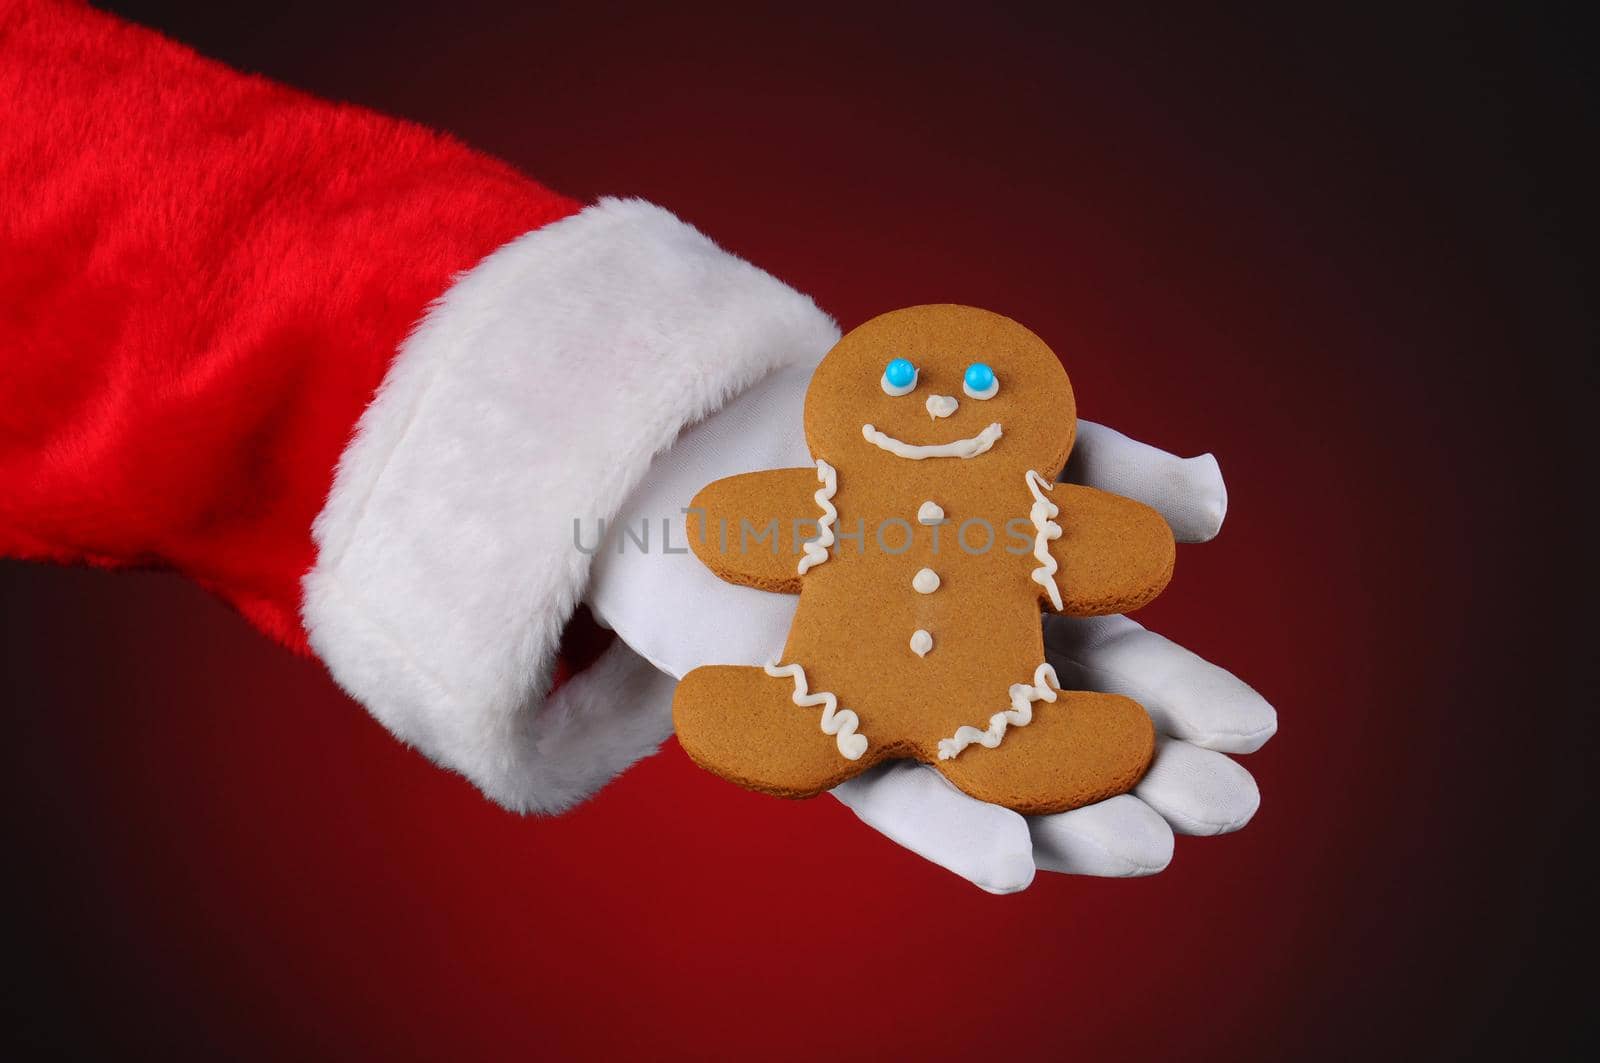 Santa Claus Holding Gingerbread Man in His Hand by sCukrov